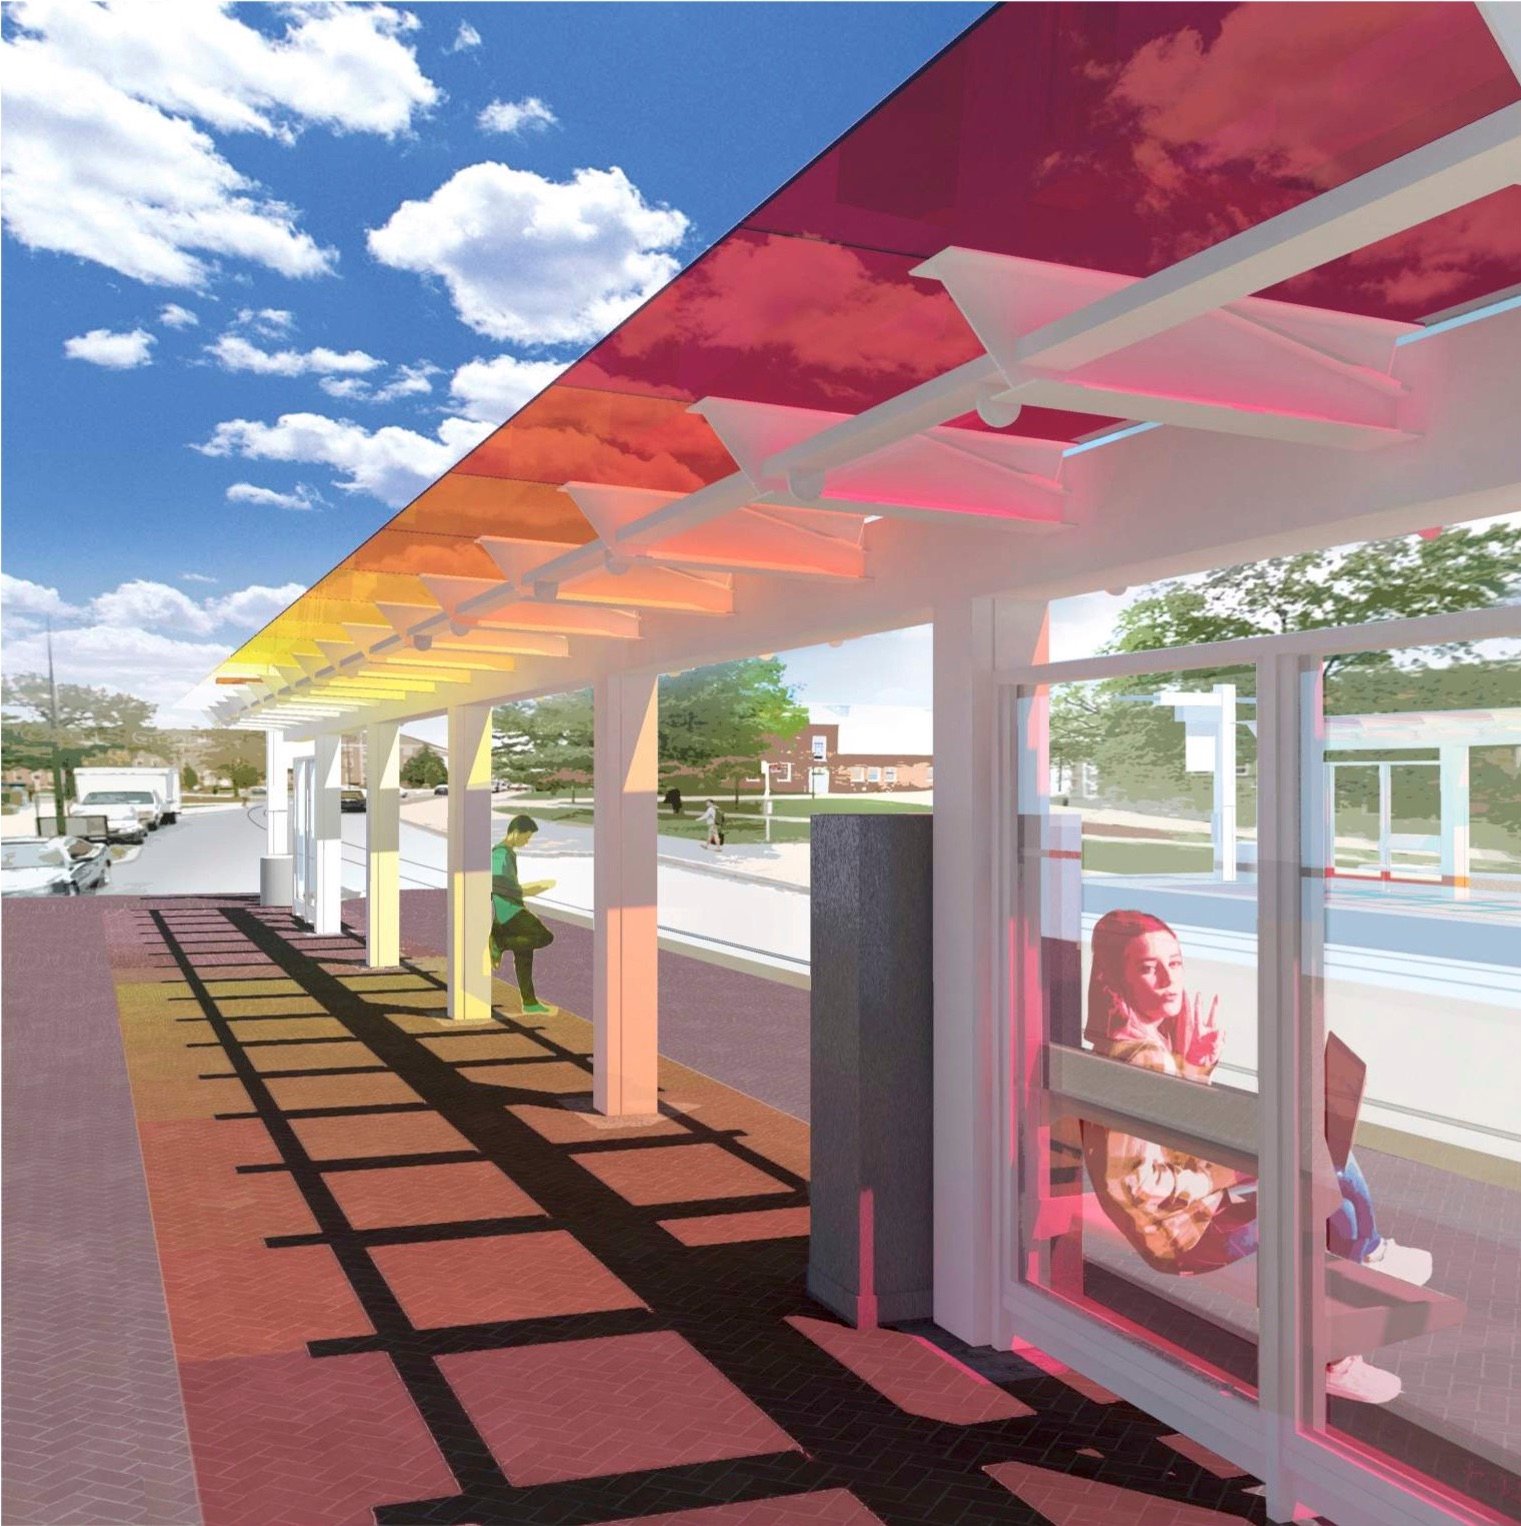 LOOK: The Art Planned for Purple Line Stations